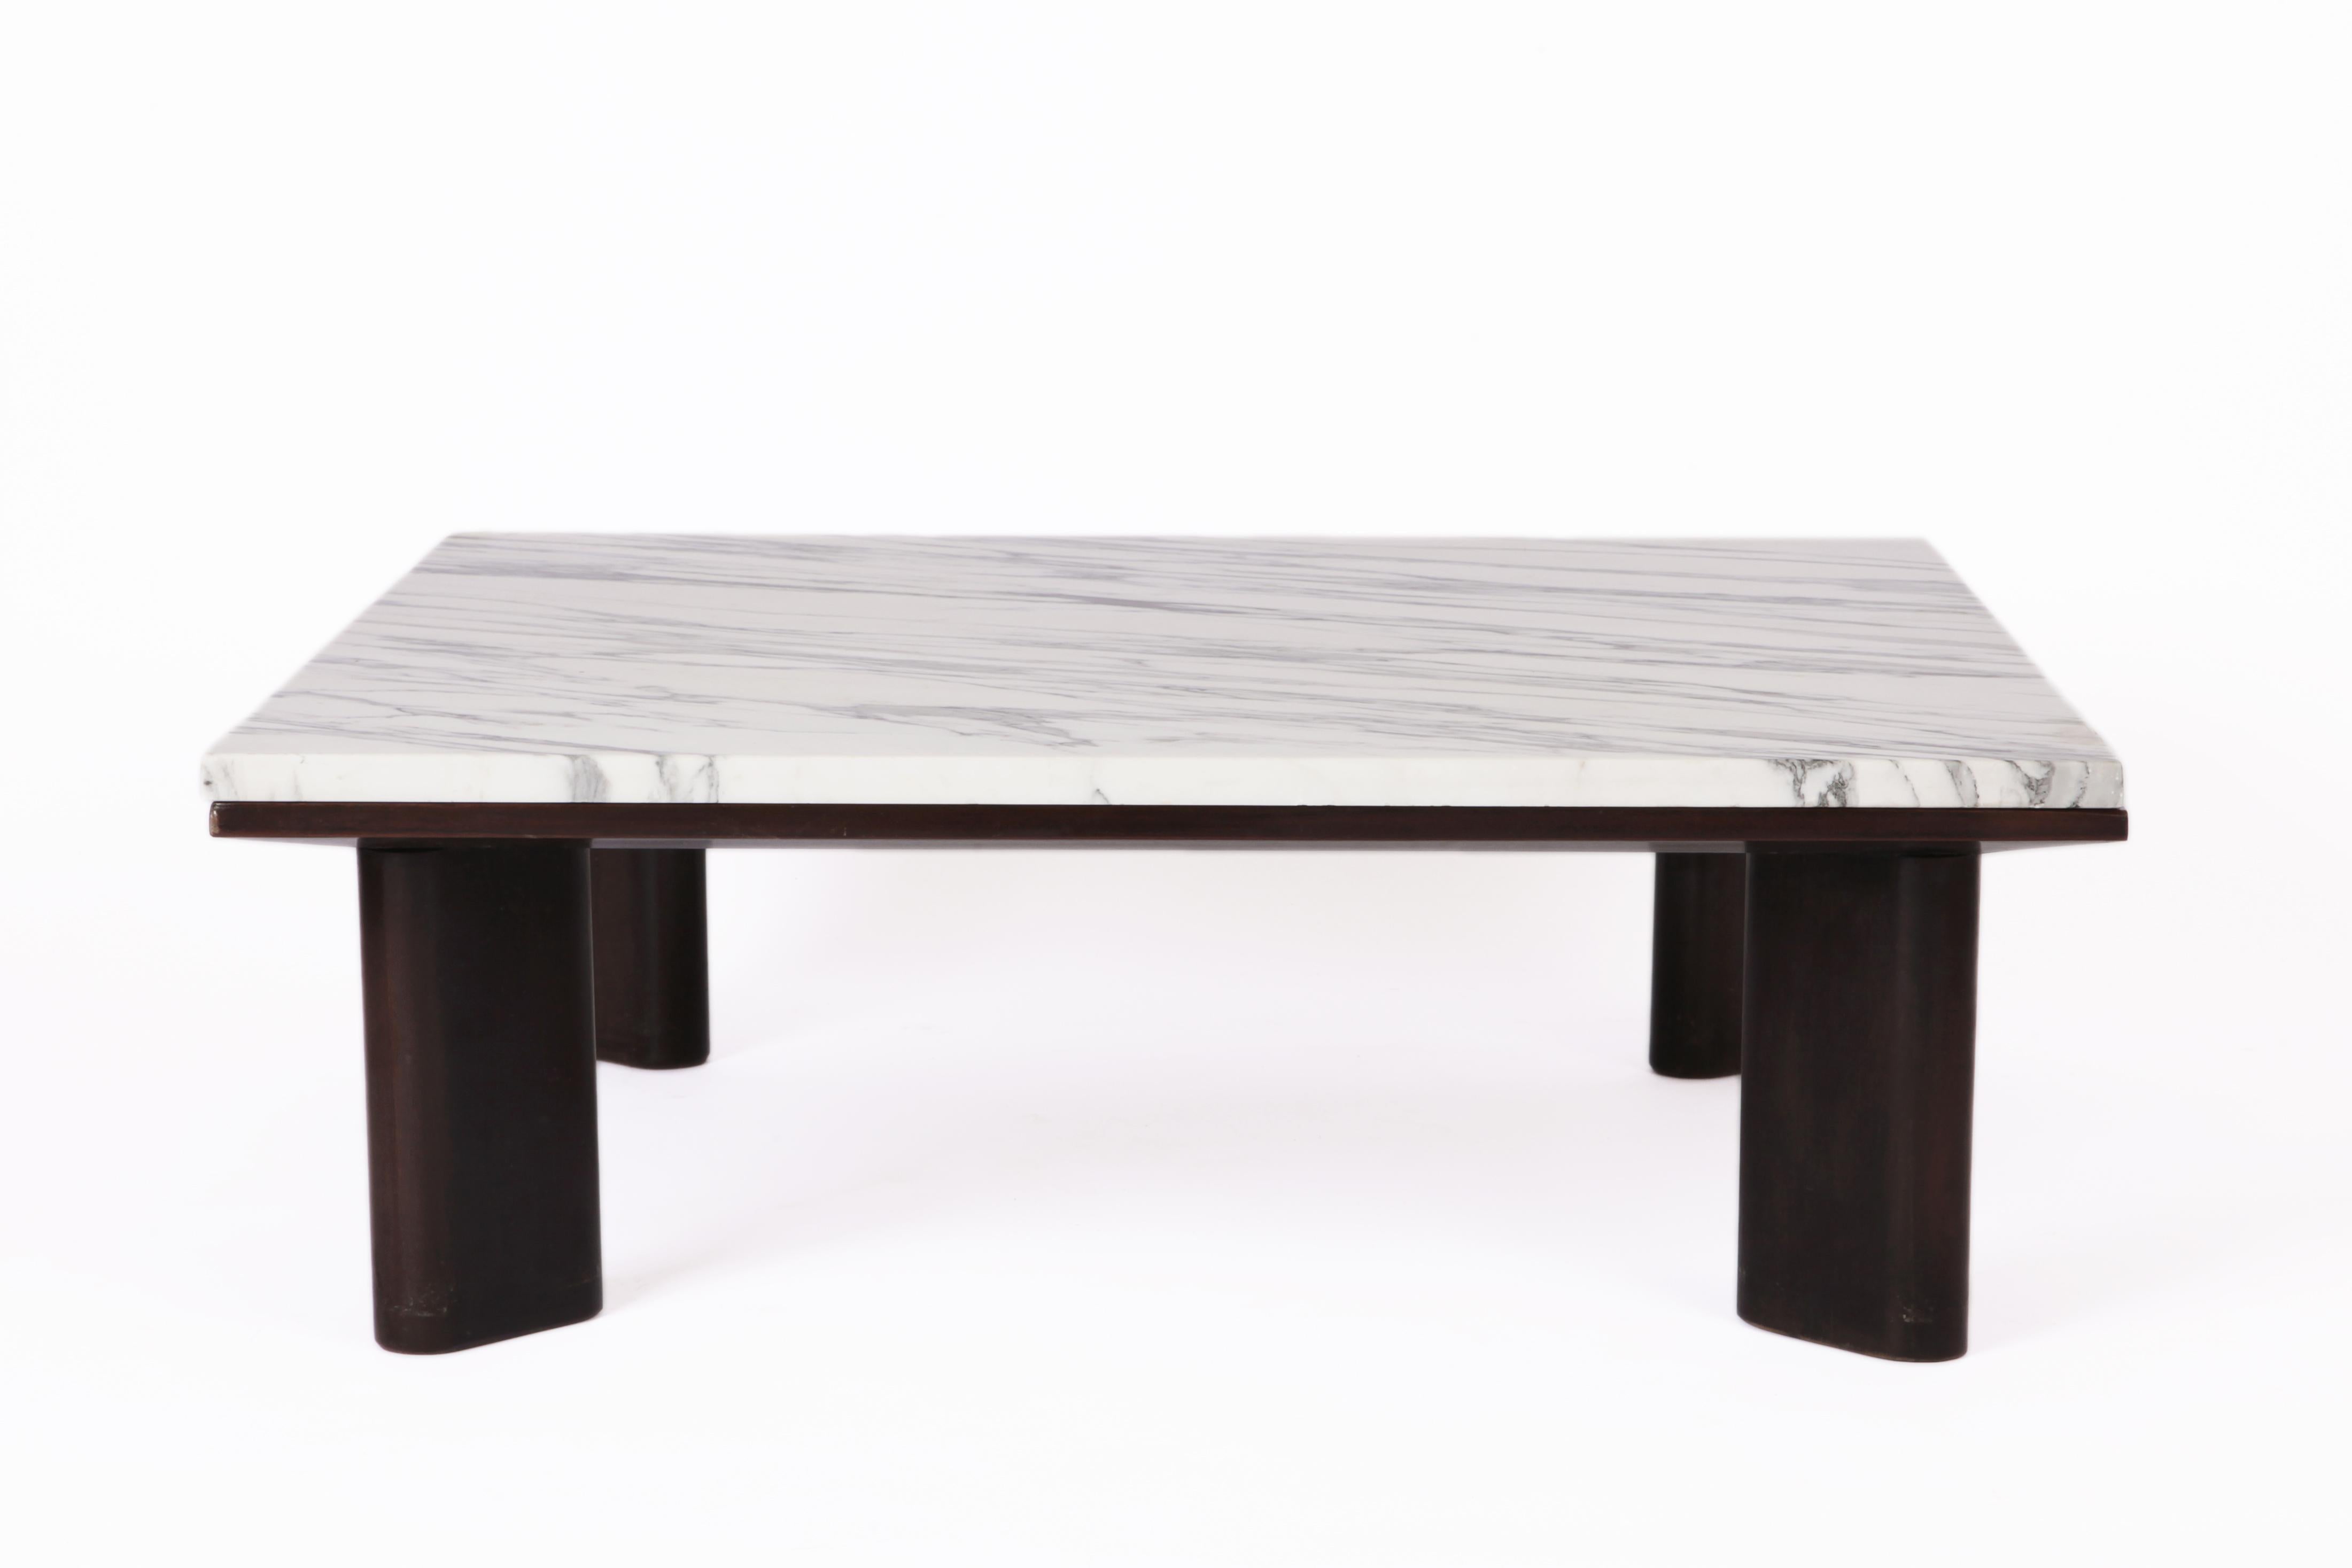 A marble and wood coffee table by Joaquim Tenreiro. 1960

The modern legs in the shape of an ellipse, a flush construction of the marble top with the wooden structure.  
A contrast between the two materials; the thickness of marble is identical to